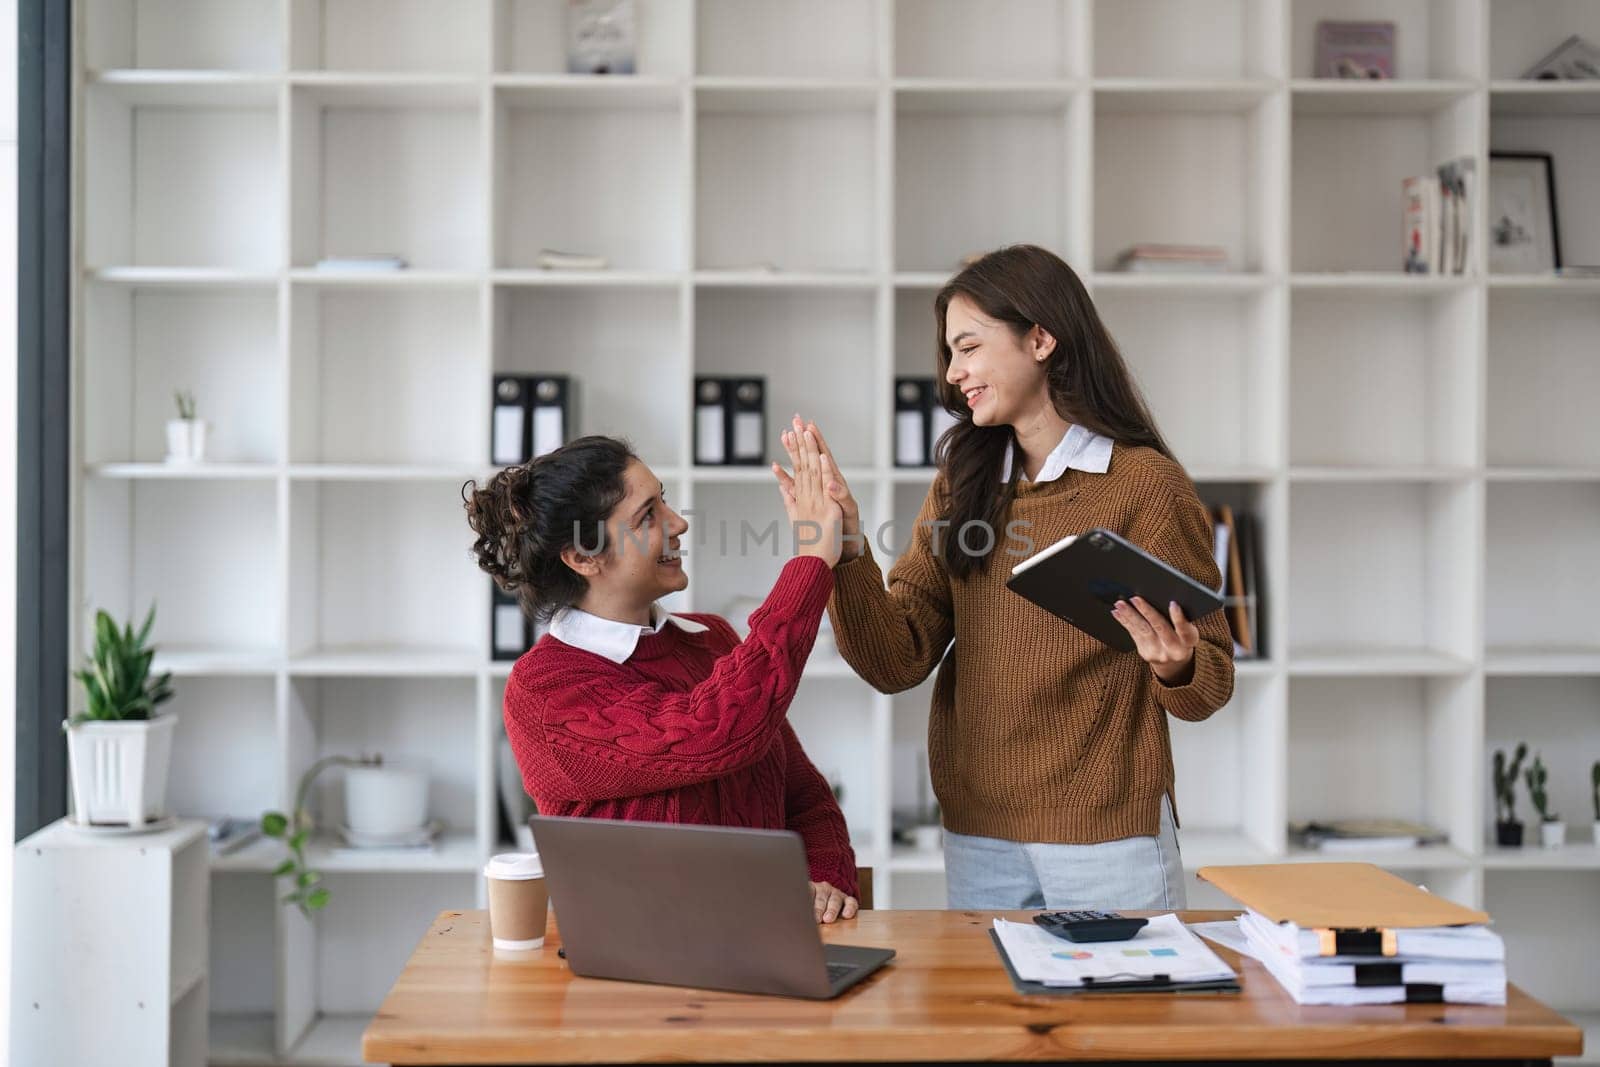 Successful business people giving each other a high five in a meeting. Two young business celebrating teamwork in an office..